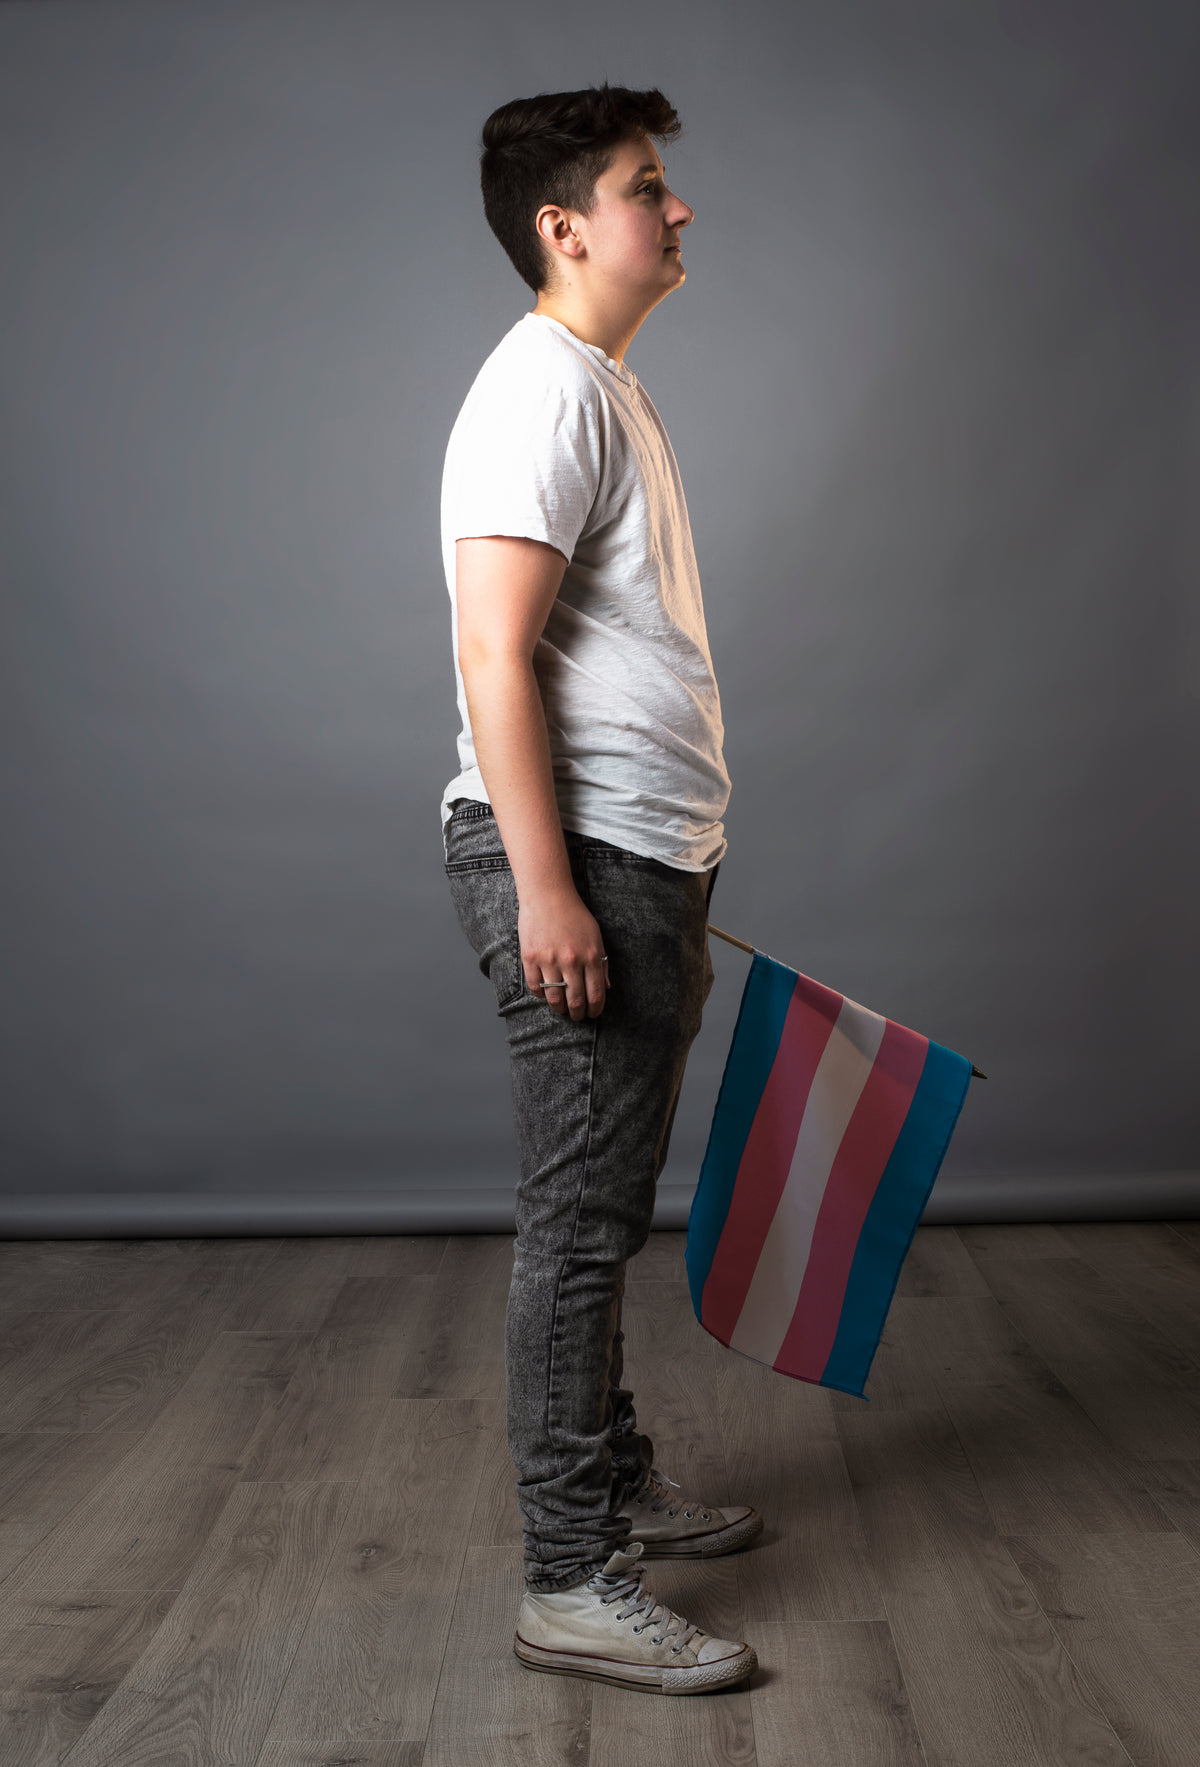 full side view of person holding trans pride flag